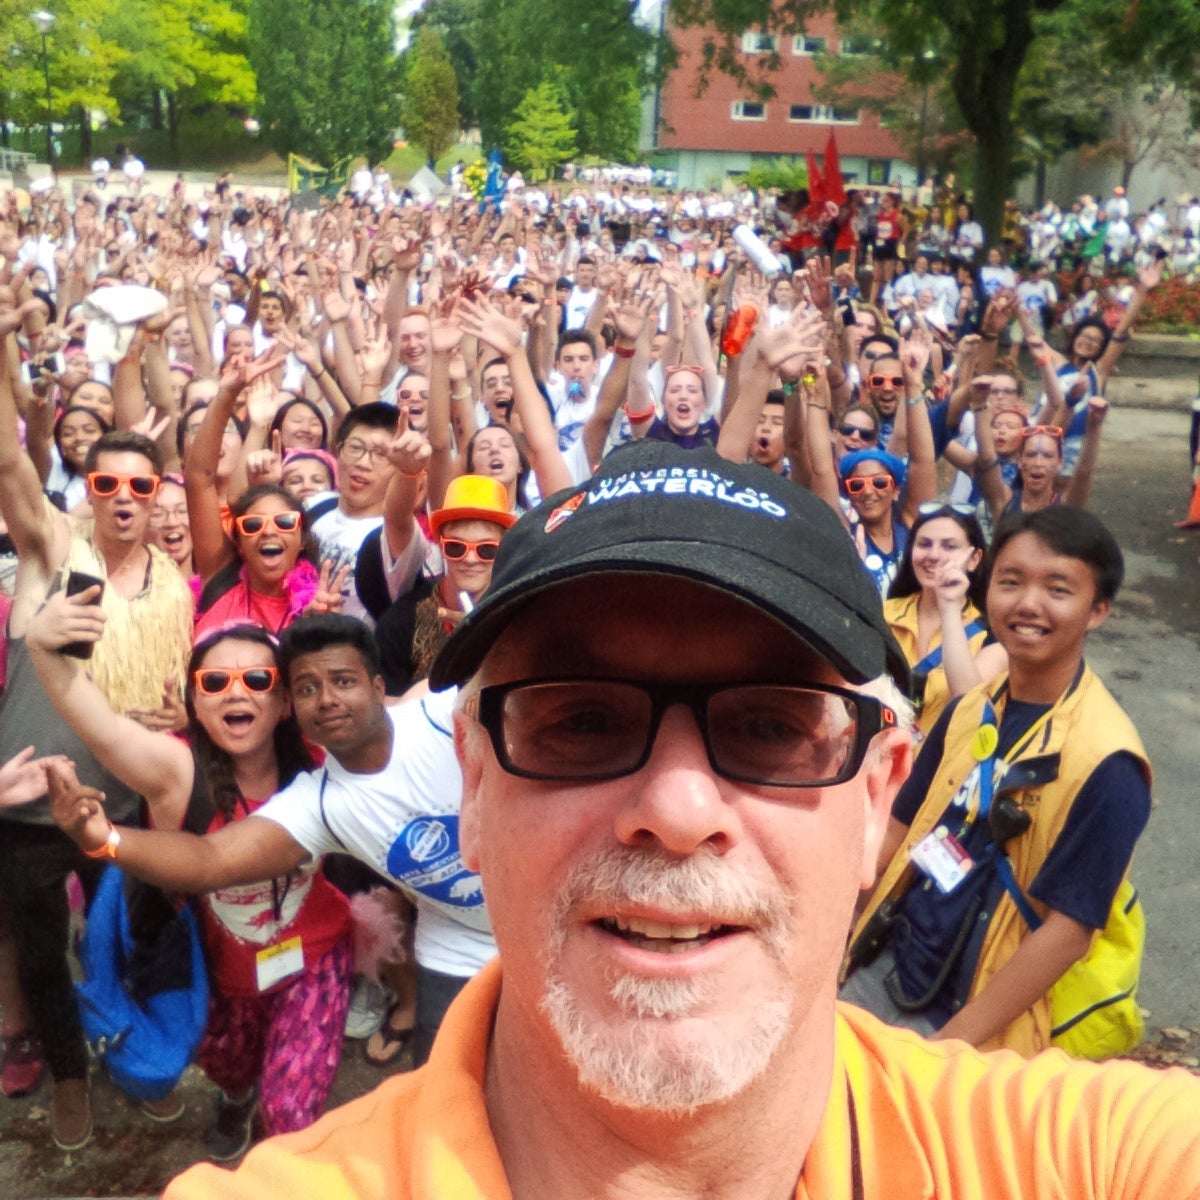 Doug Peers selfie with large group of students in background